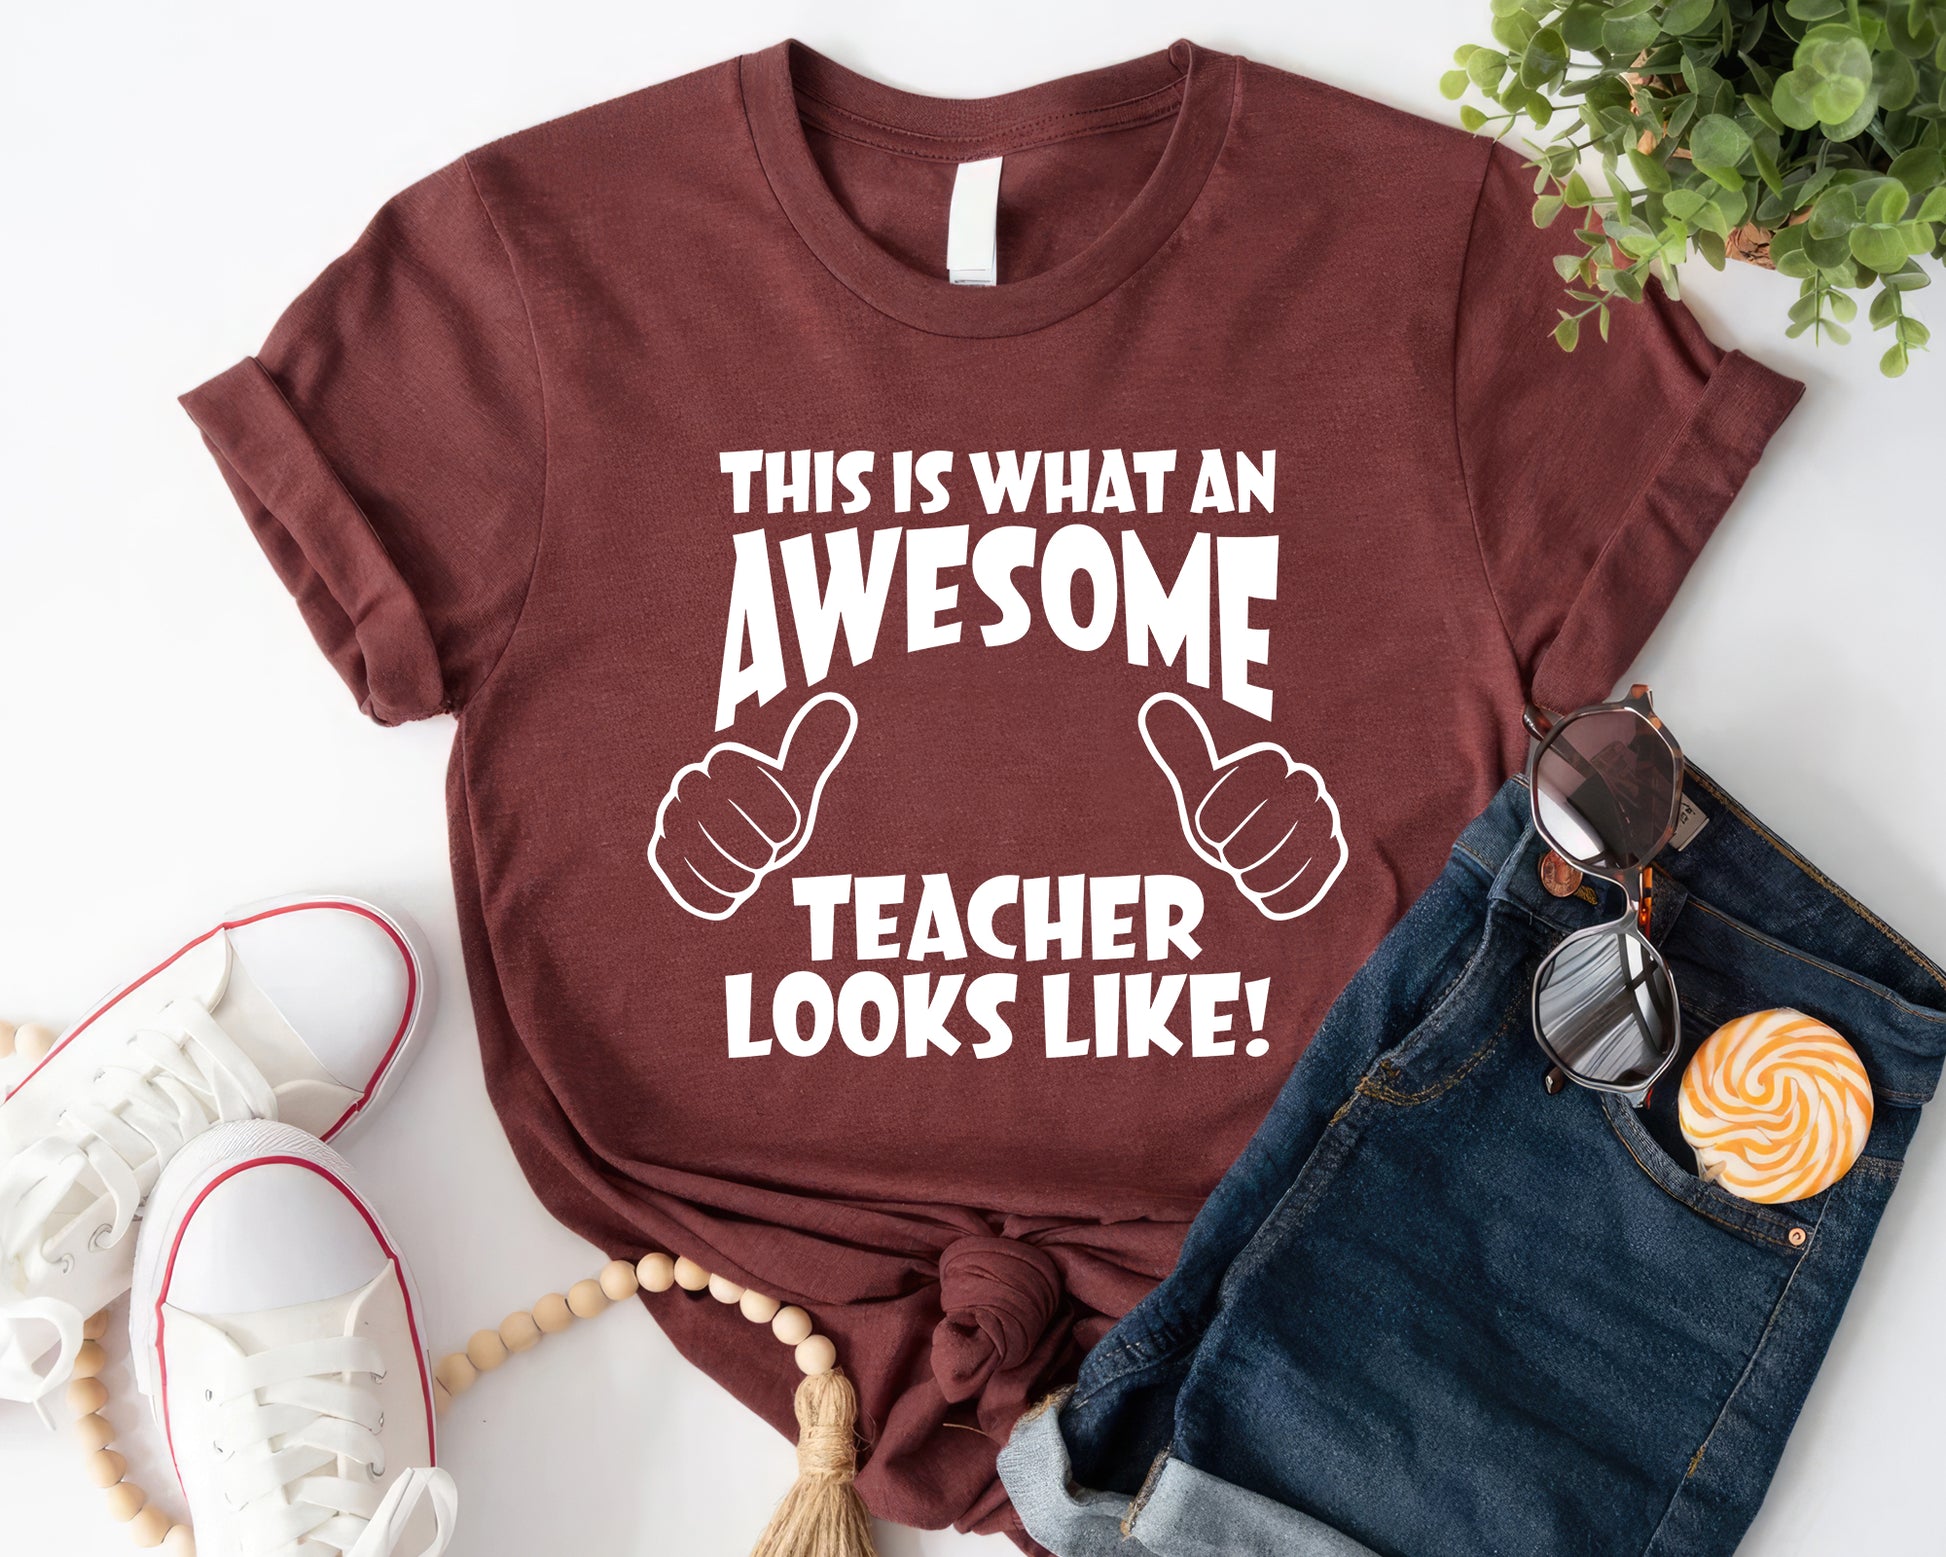 This Is An Awesome Teacher Looks Like Personalized Tee | Back To School Customized T-shirts | Funny Quote Teacher T-shirt - Maroon